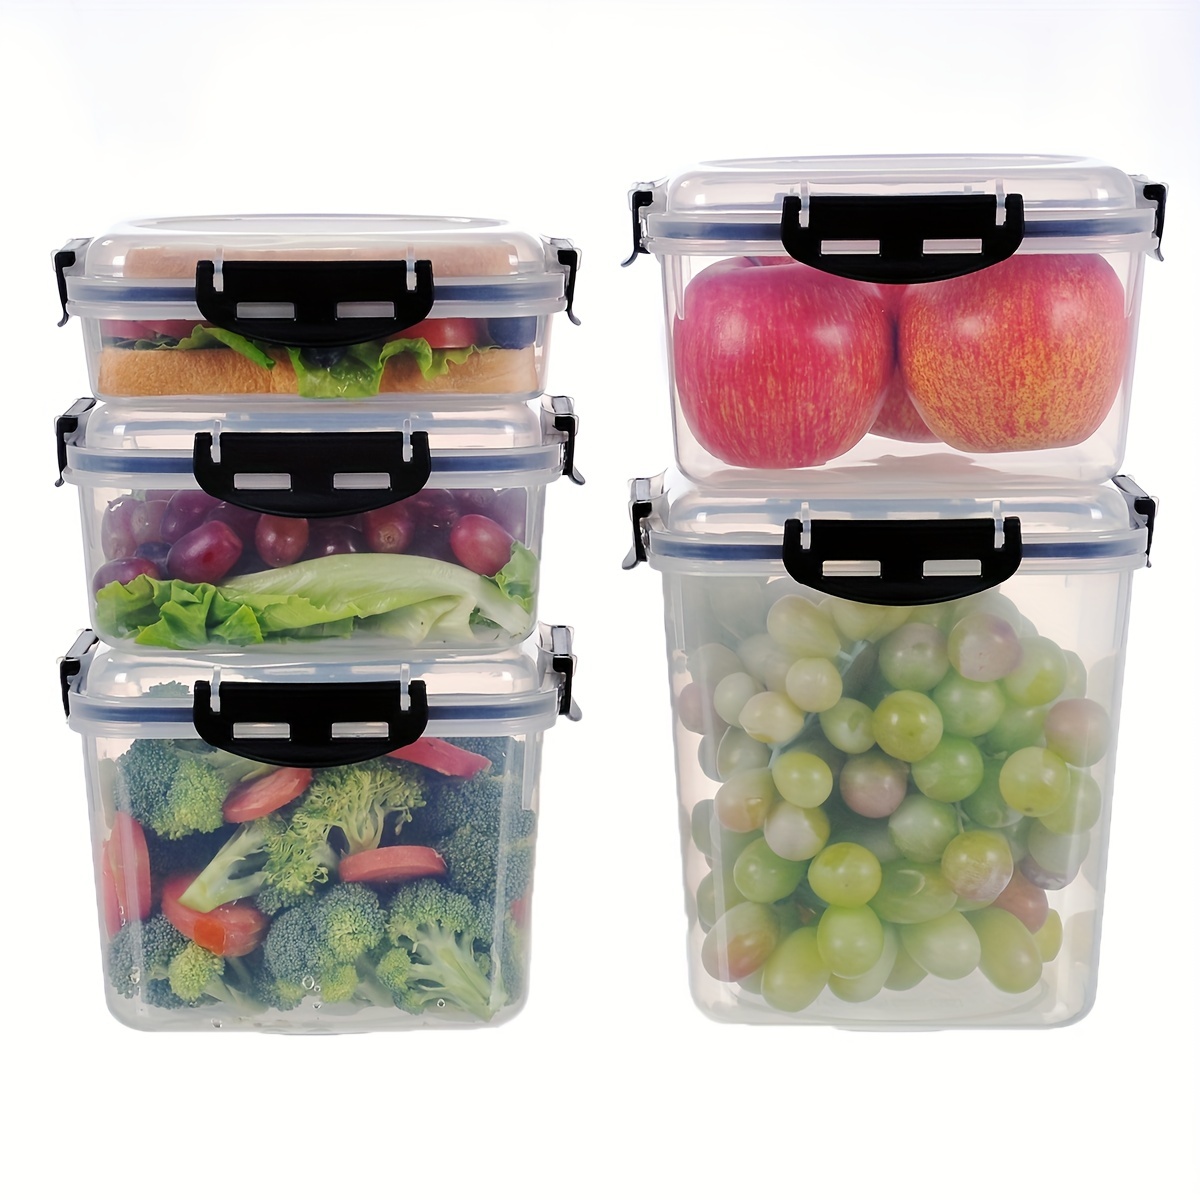 Large Capacity Storage Box, Clasp Detachable Design Storage Container,  Thicken Airtight Food Storage Clear Boxswith Lids, Plastic Bpa Free  Waterproof Pantry Organization And Storage For Bulk Food Dry Food Cereal,  Home Organization 